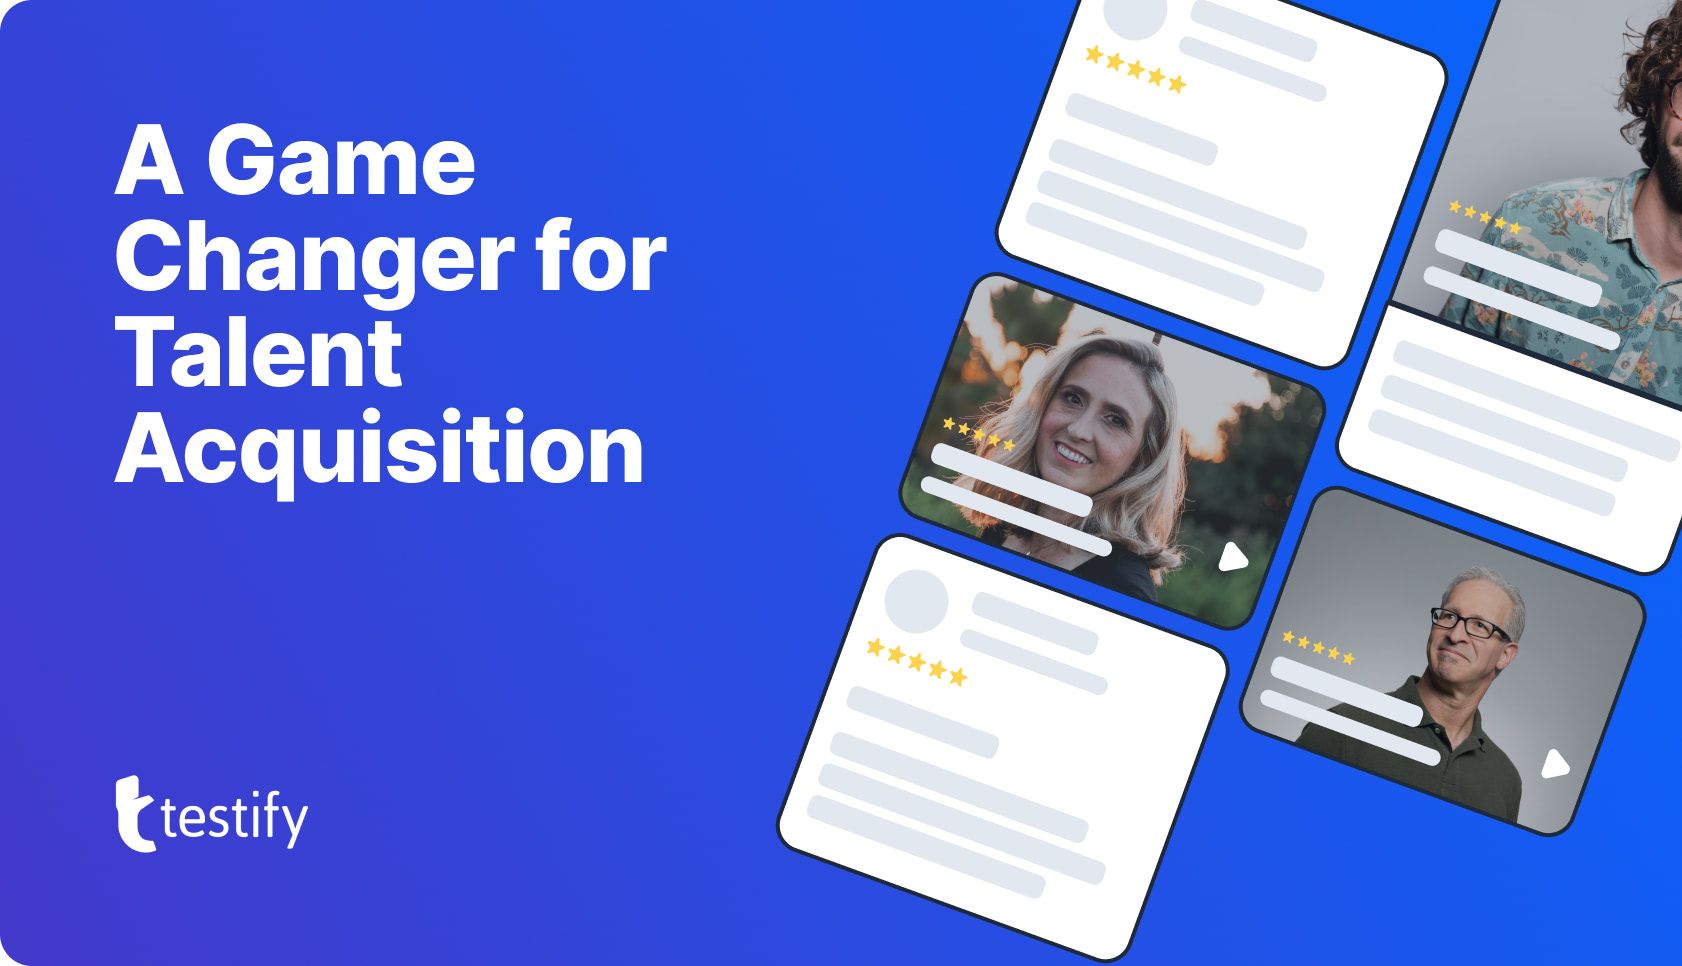 A collection of video and text testimonials for recruiters